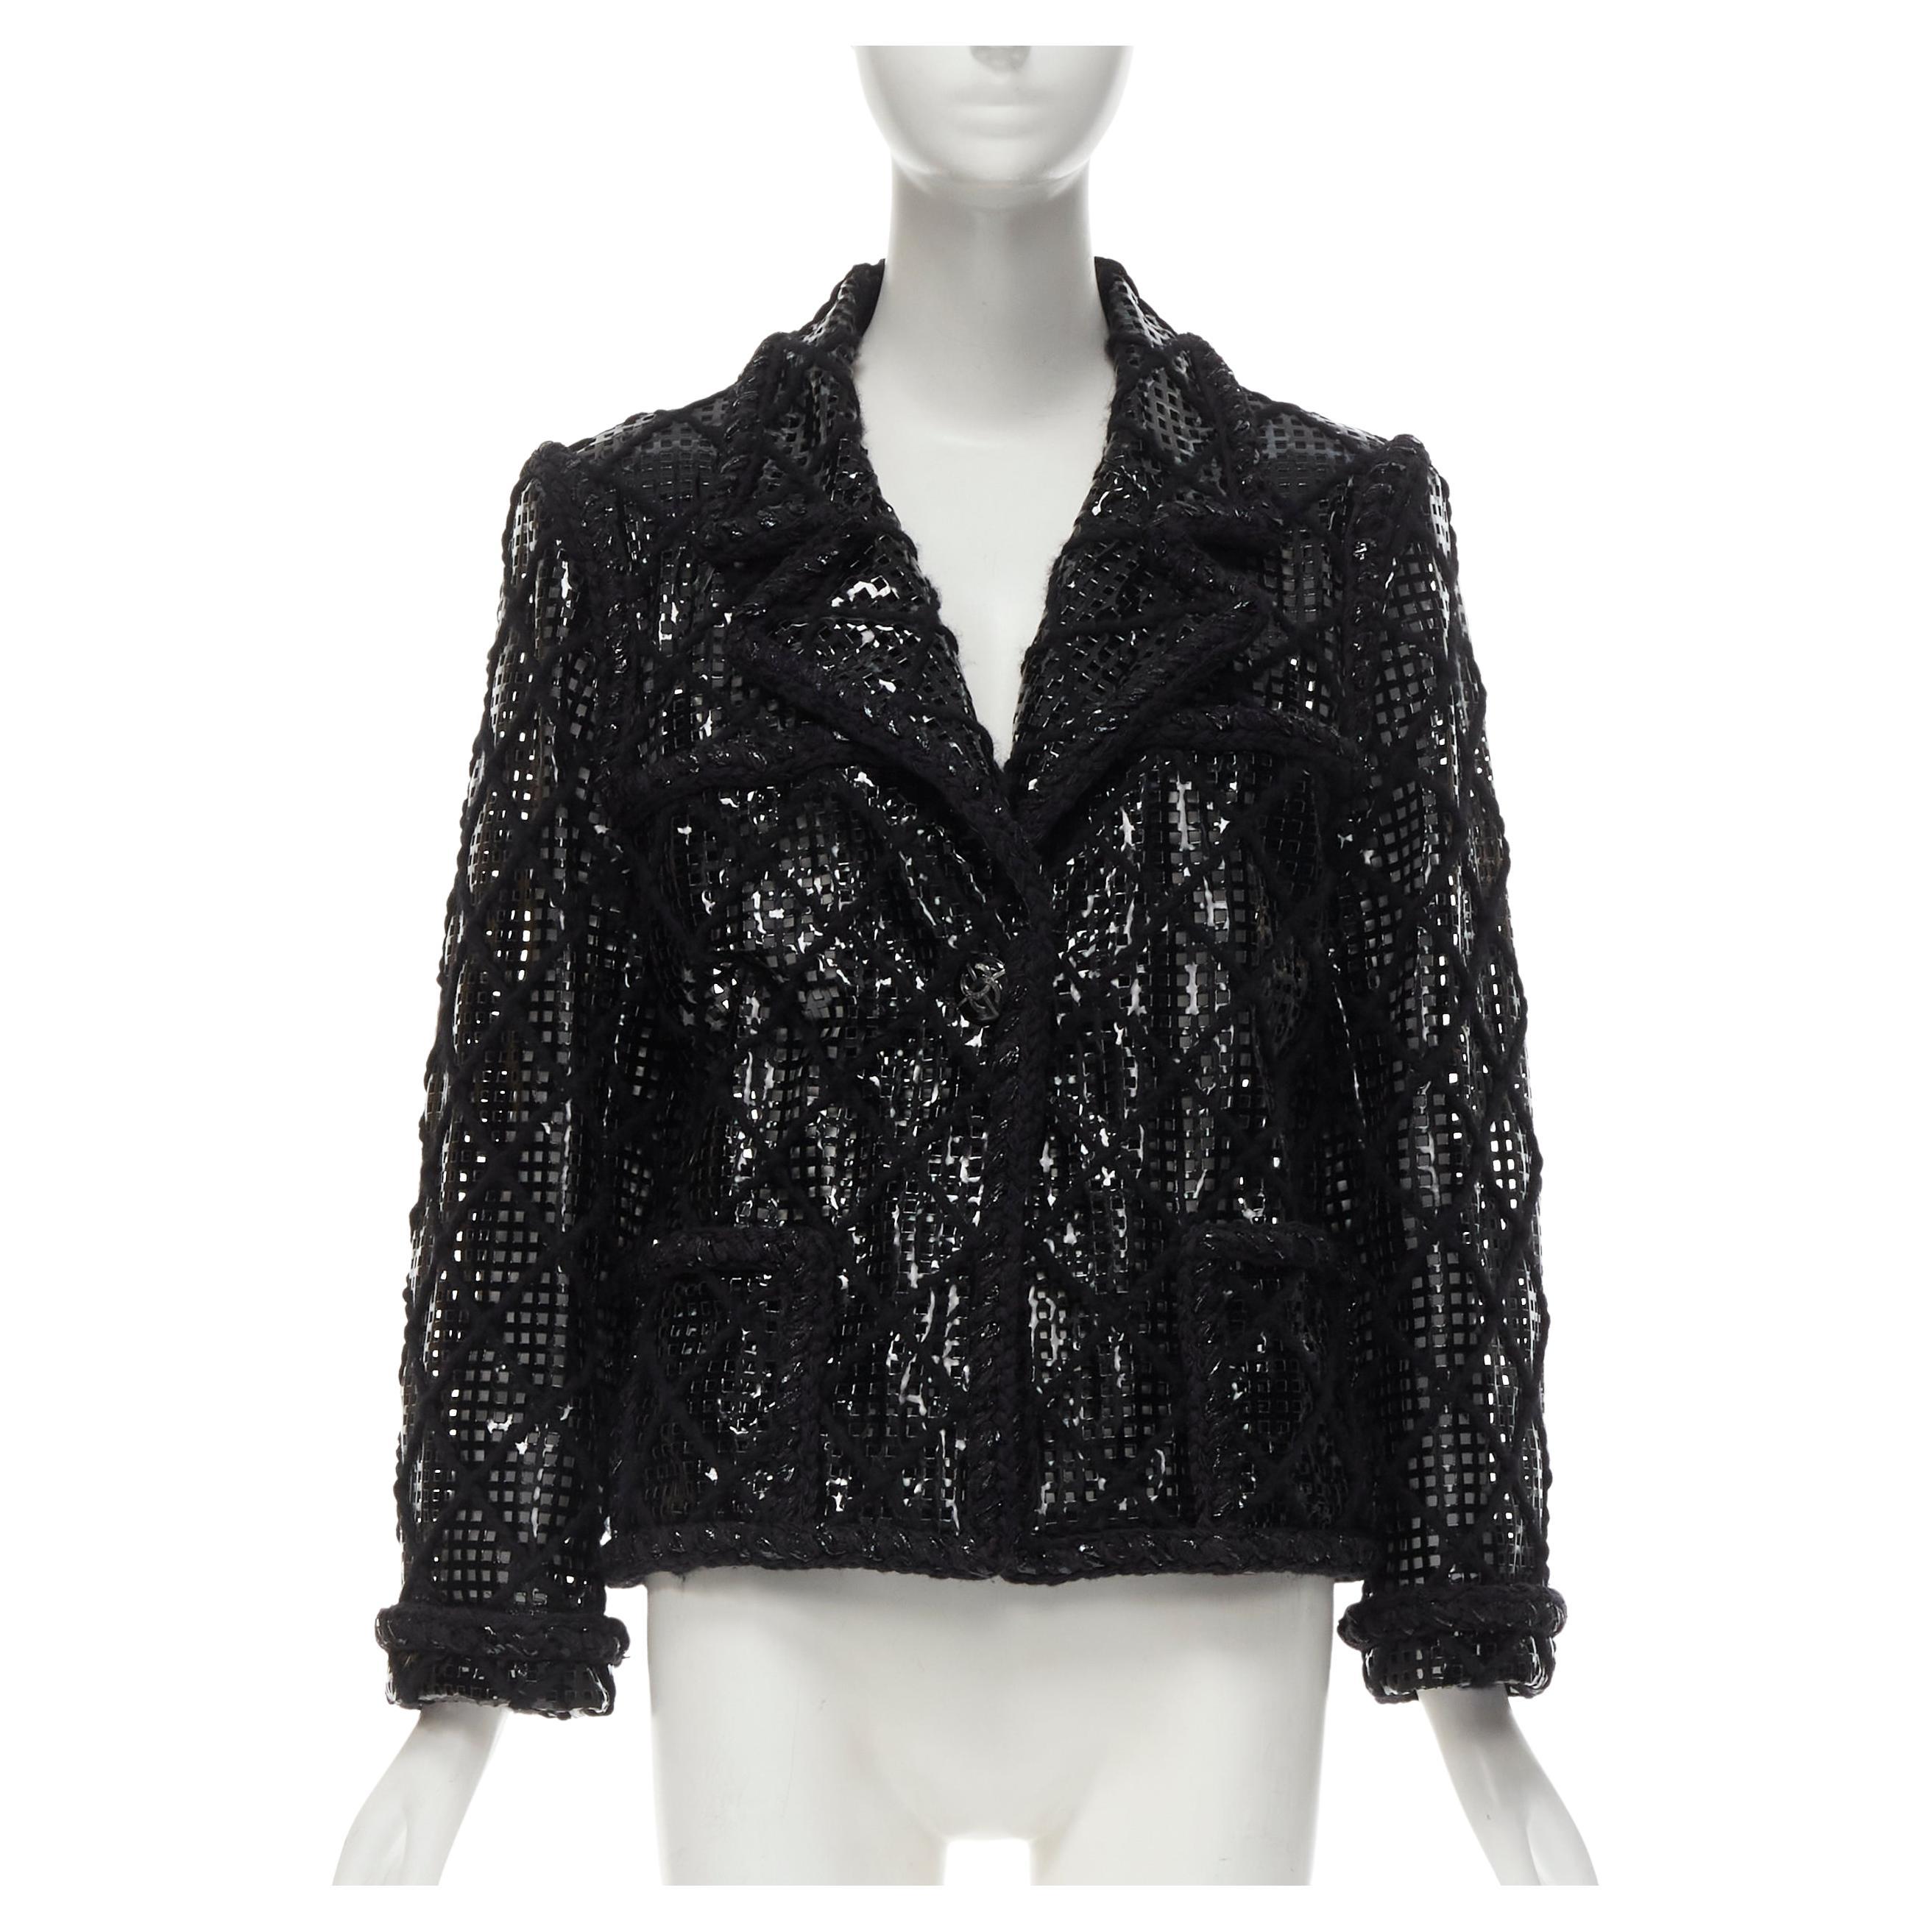 Chanel Black Lambskin Leather and Shearling Floral Motorcycle Jacket Size  8/40 - Yoogi's Closet